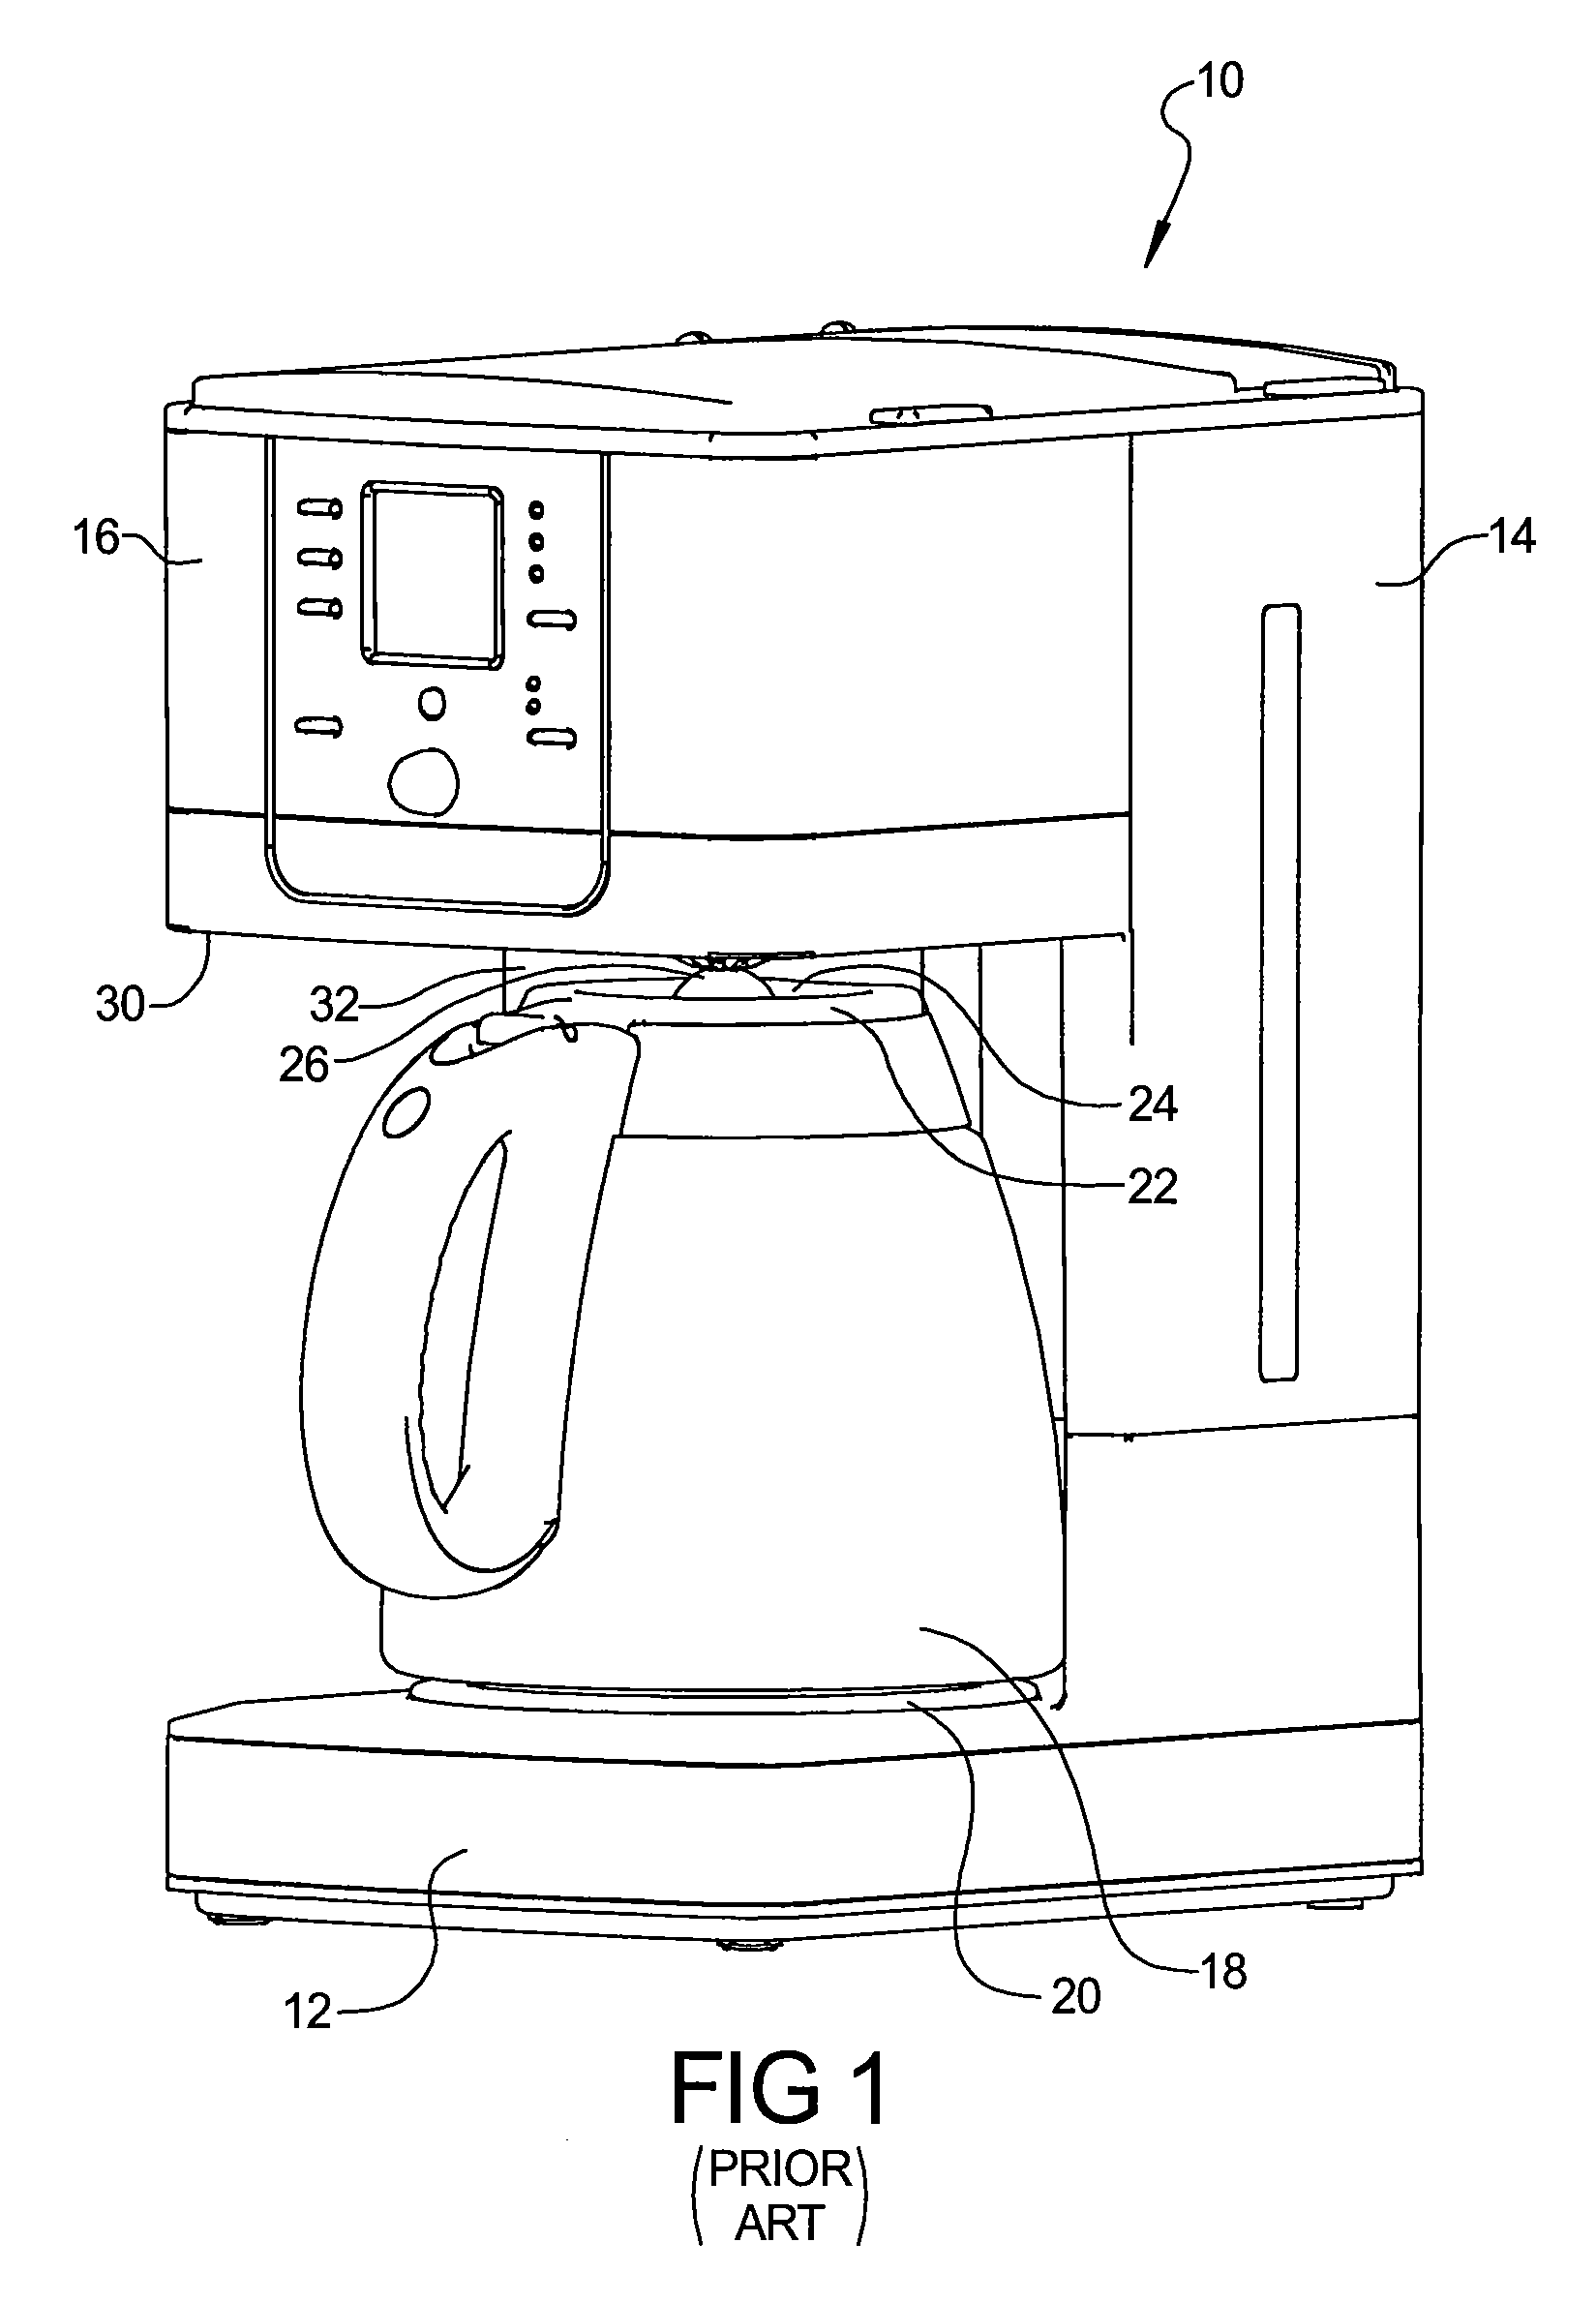 Brewing device having a delayed release mechanism